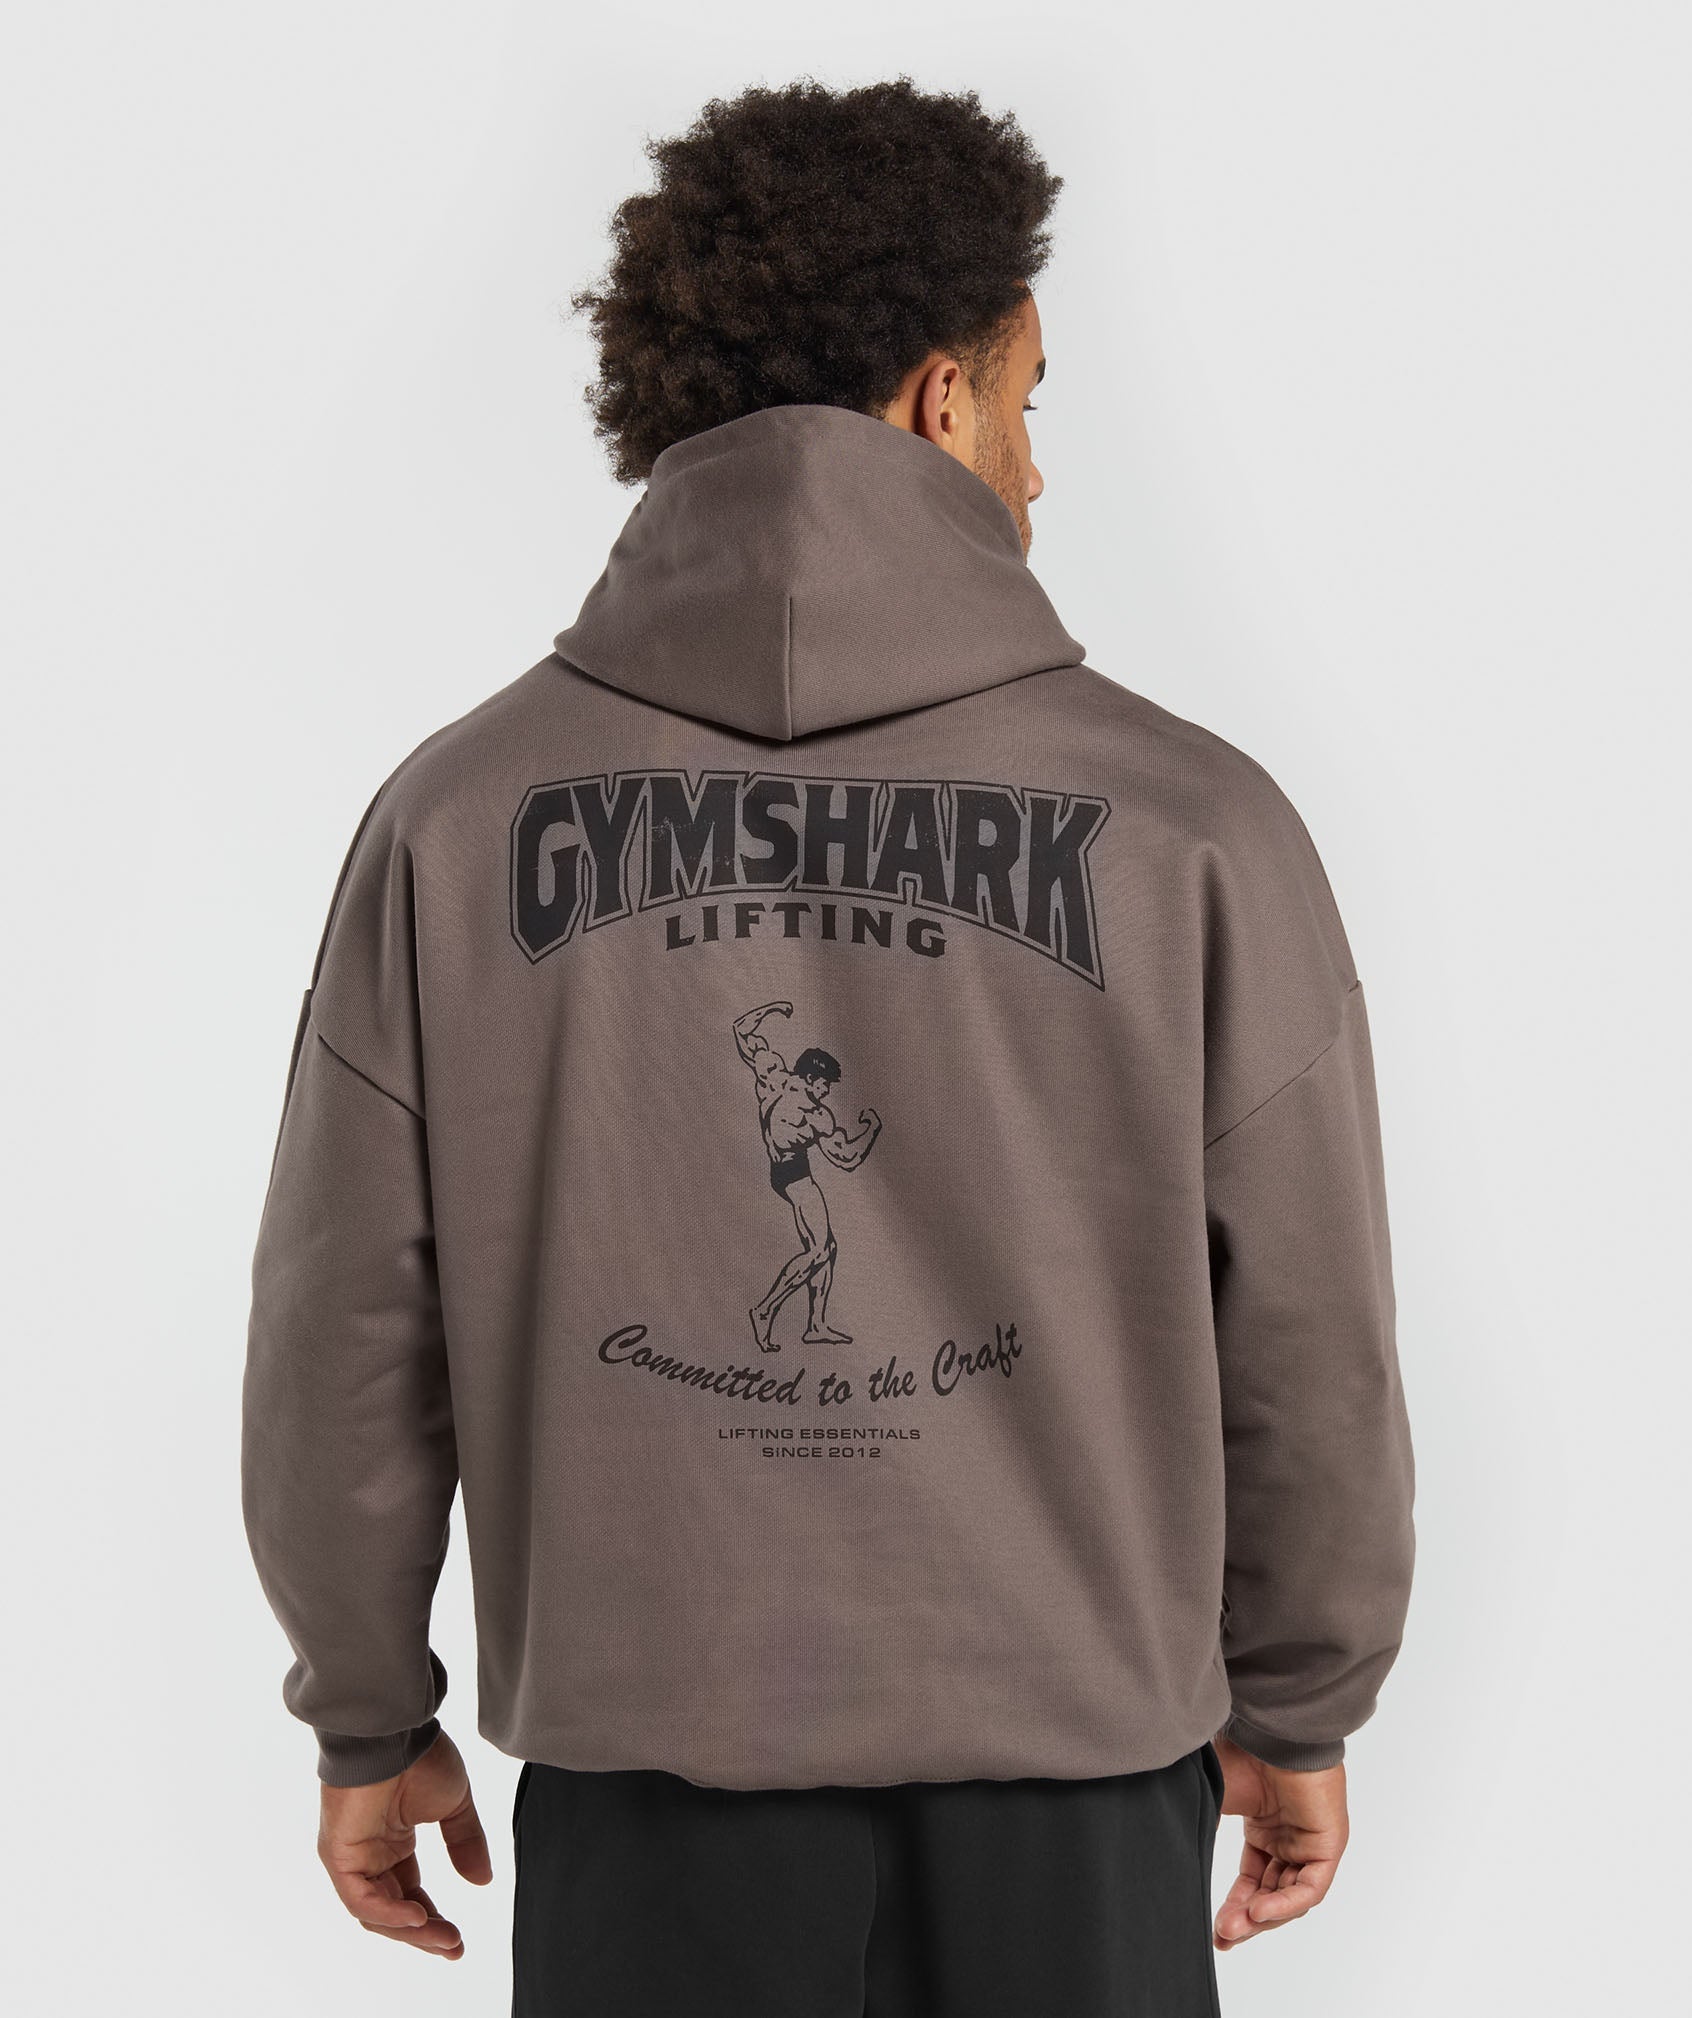 Gymshark Committed to the Craft Hoodie - Dusty Brown